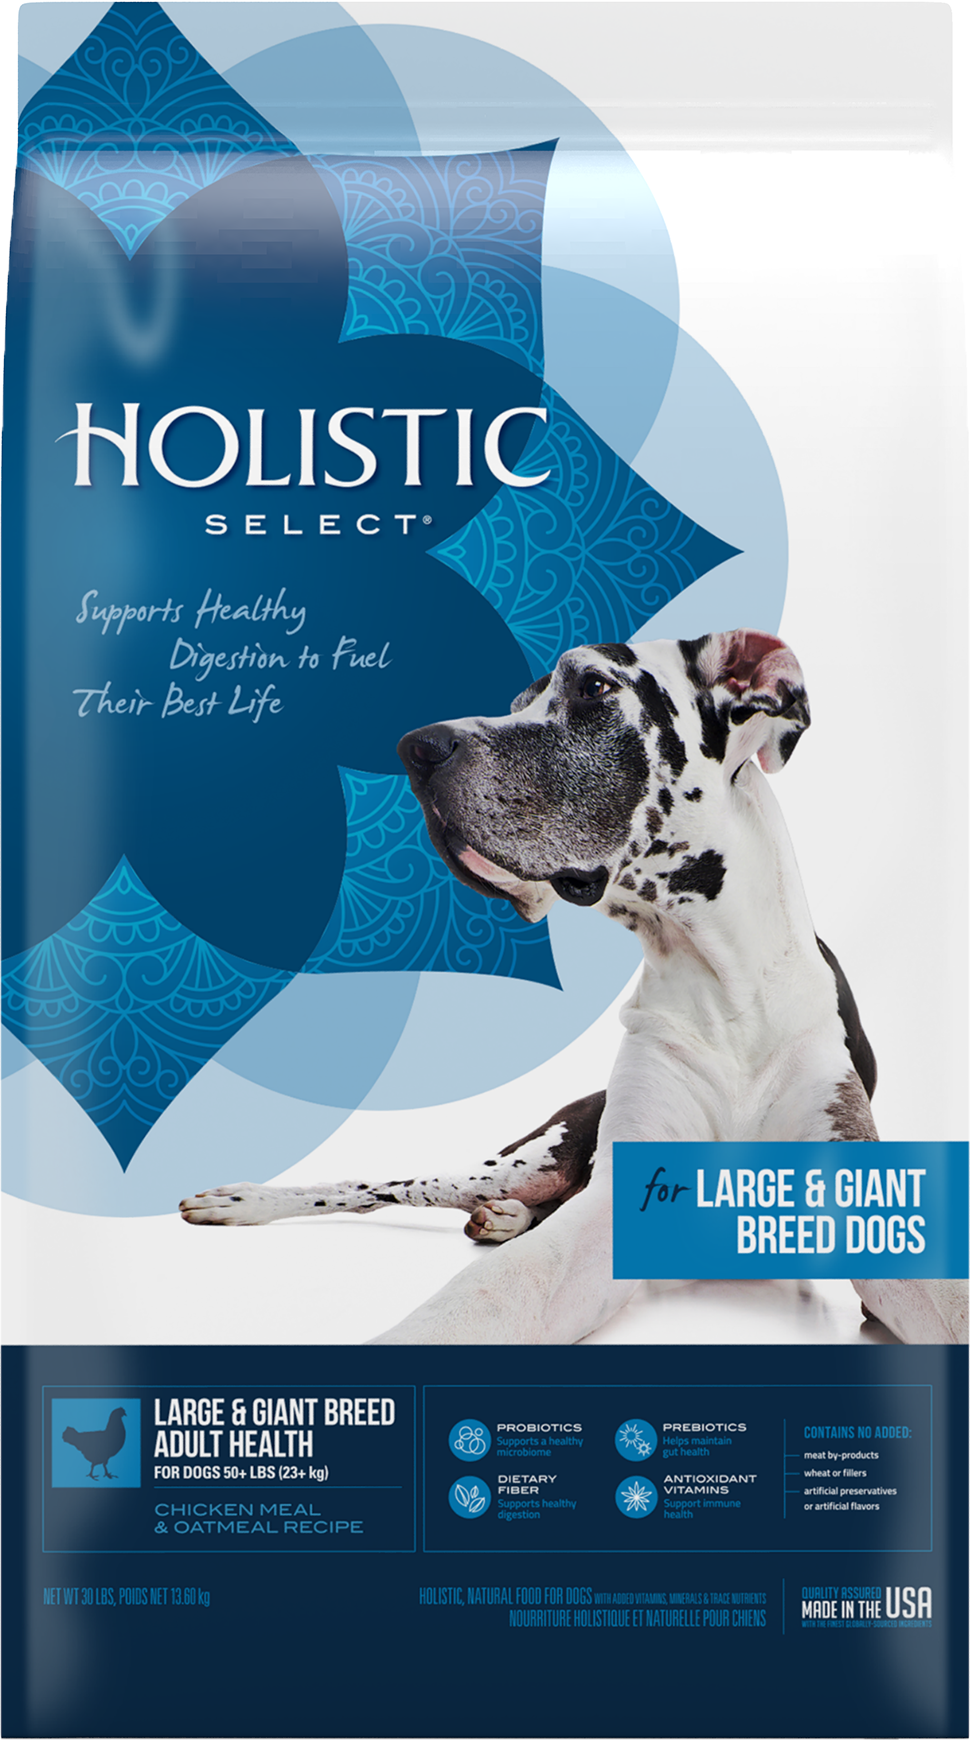 Large & Giant Breed Adult Health product packaging image 1